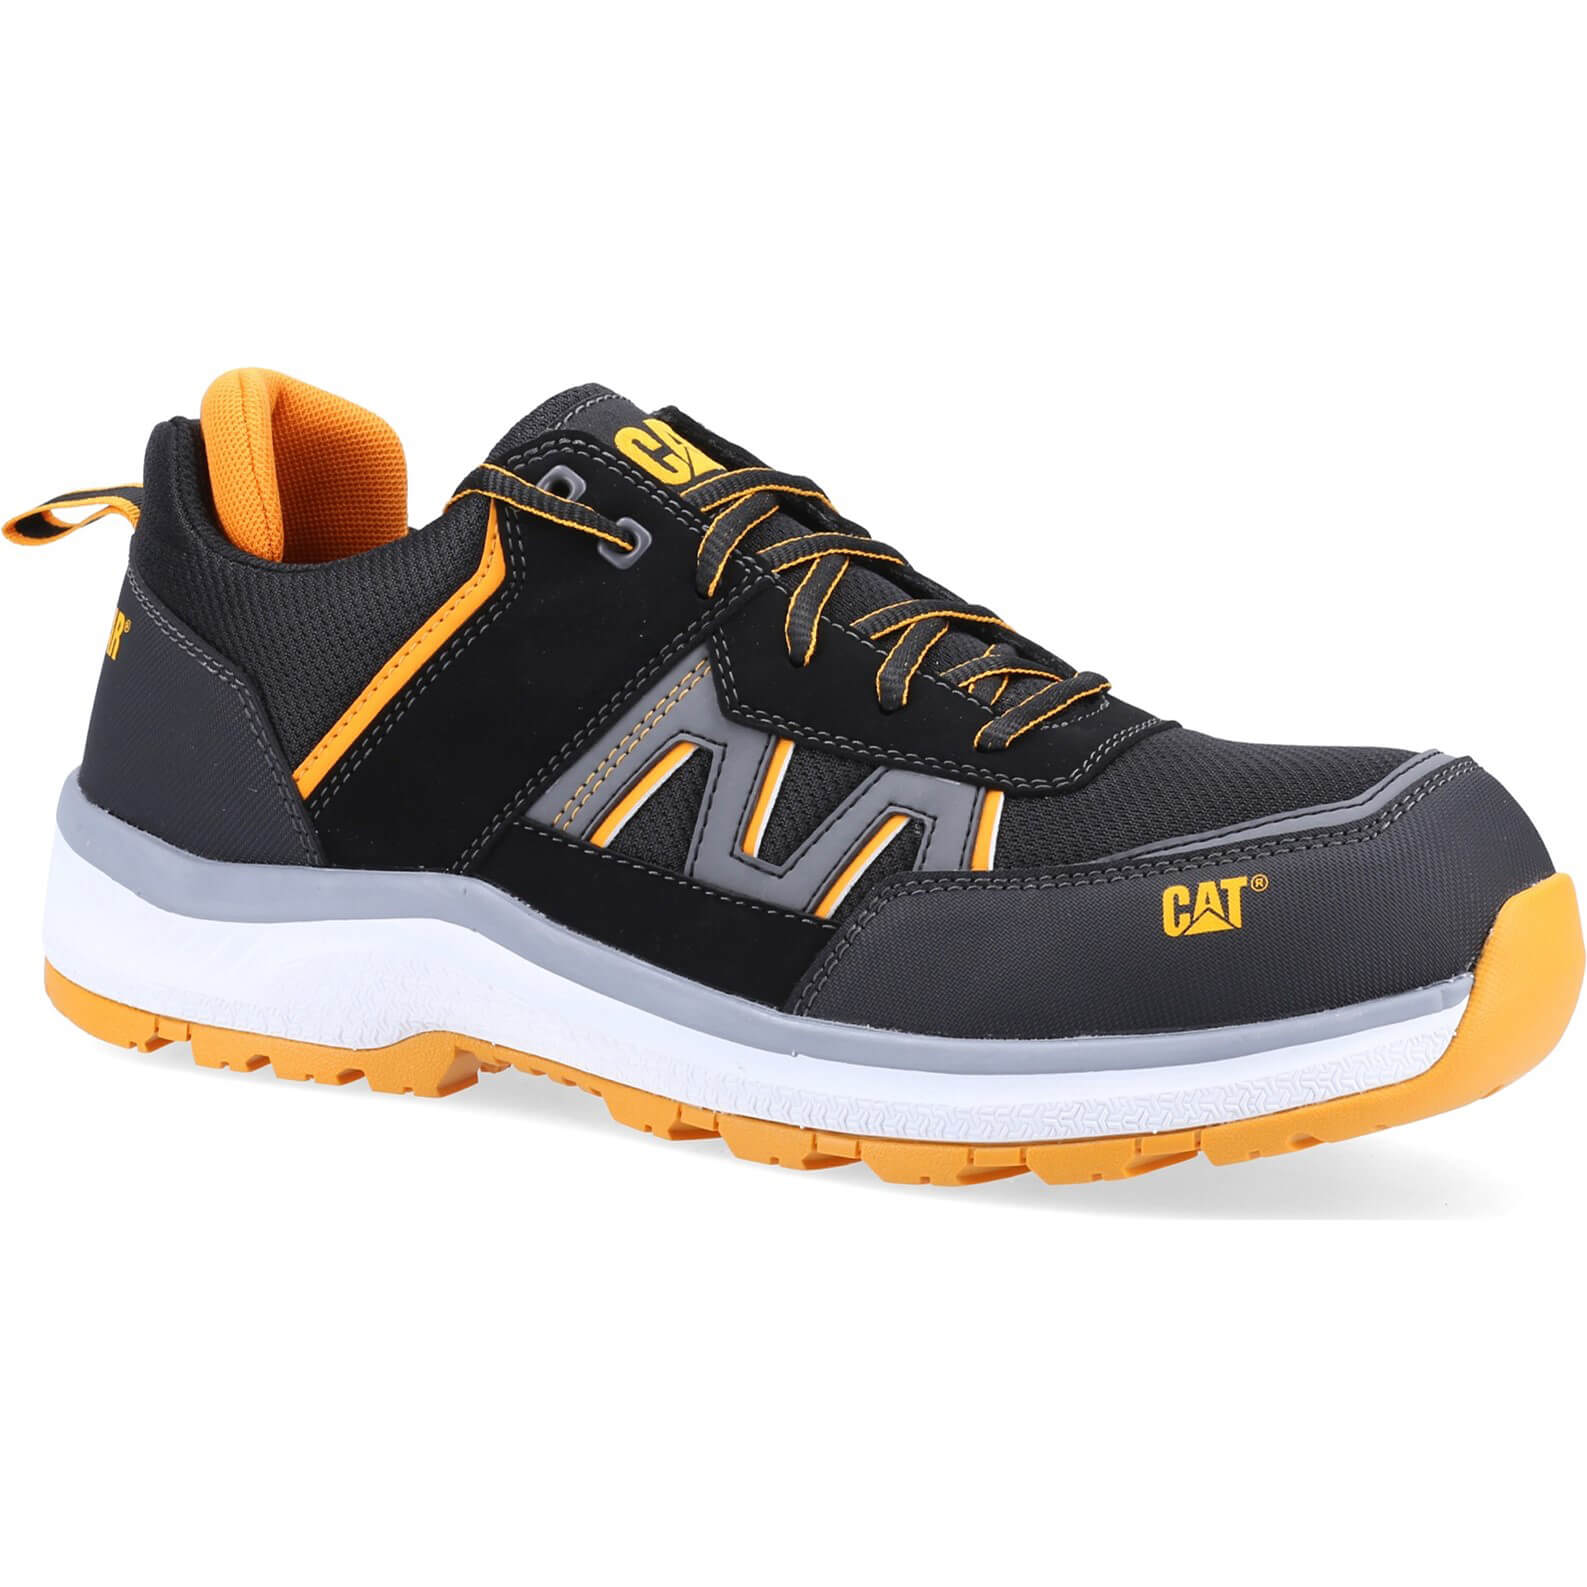 Image of Caterpillar Mens Accelerate S3 Safety Trainer Black / Orange Size 12